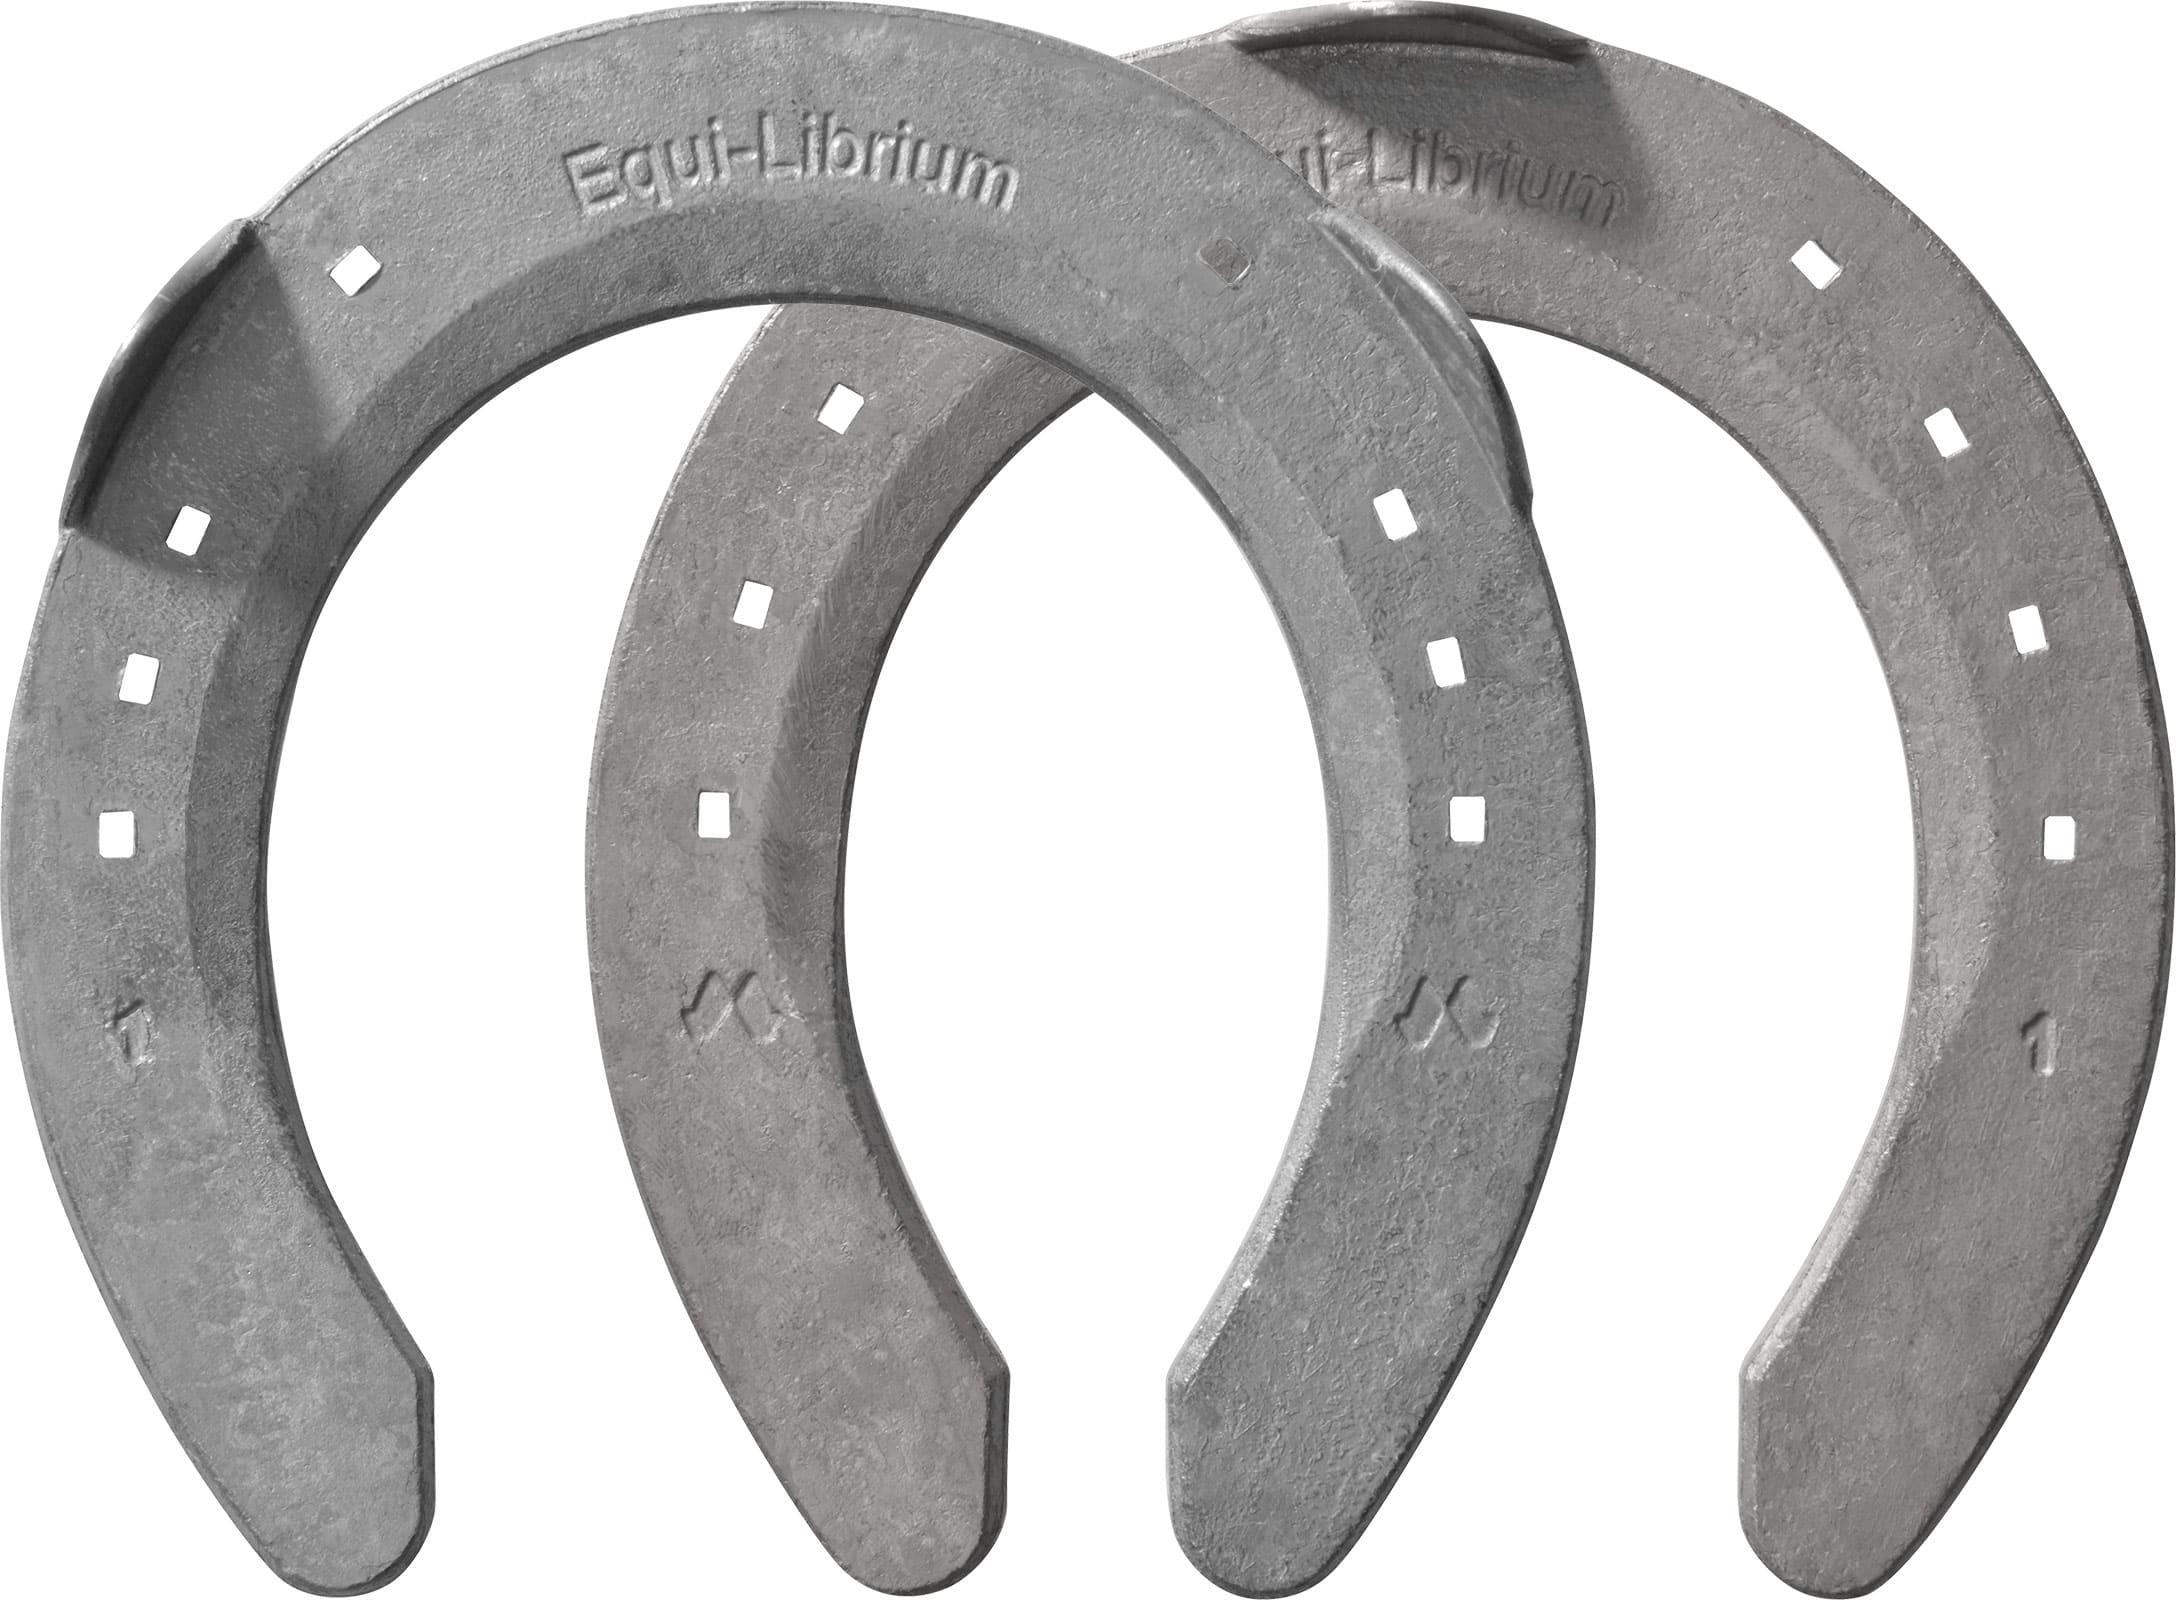 Mustad Equi-Librium horseshoes, front, side clips and toe clip, top view